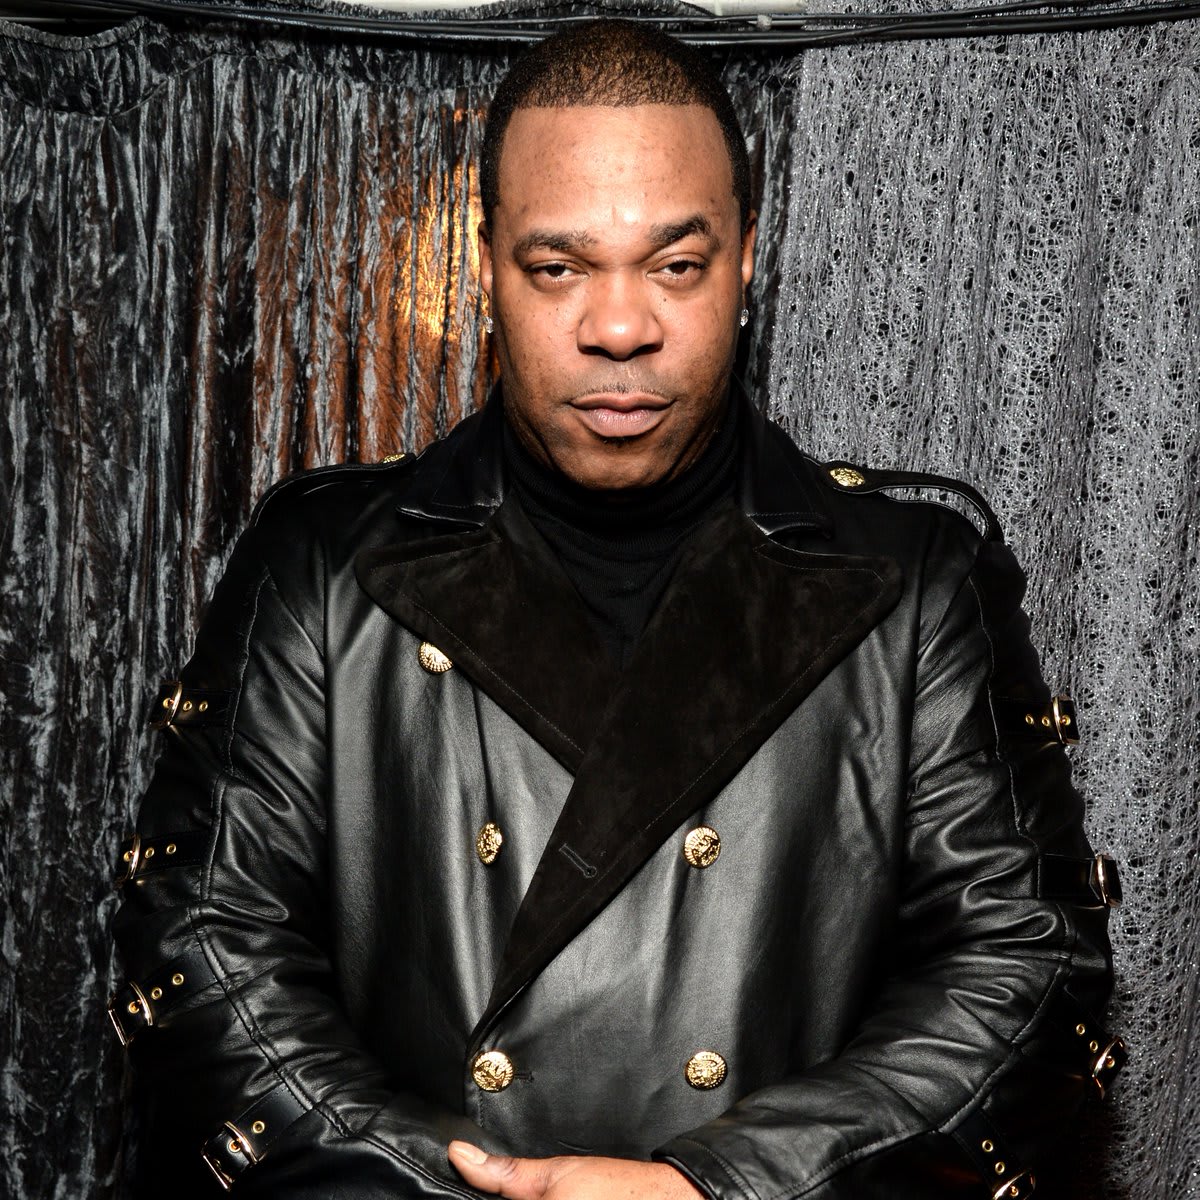 Lil Jon says Busta Rhymes would “smoke” Jay-Z in a Verzuz battle. More: